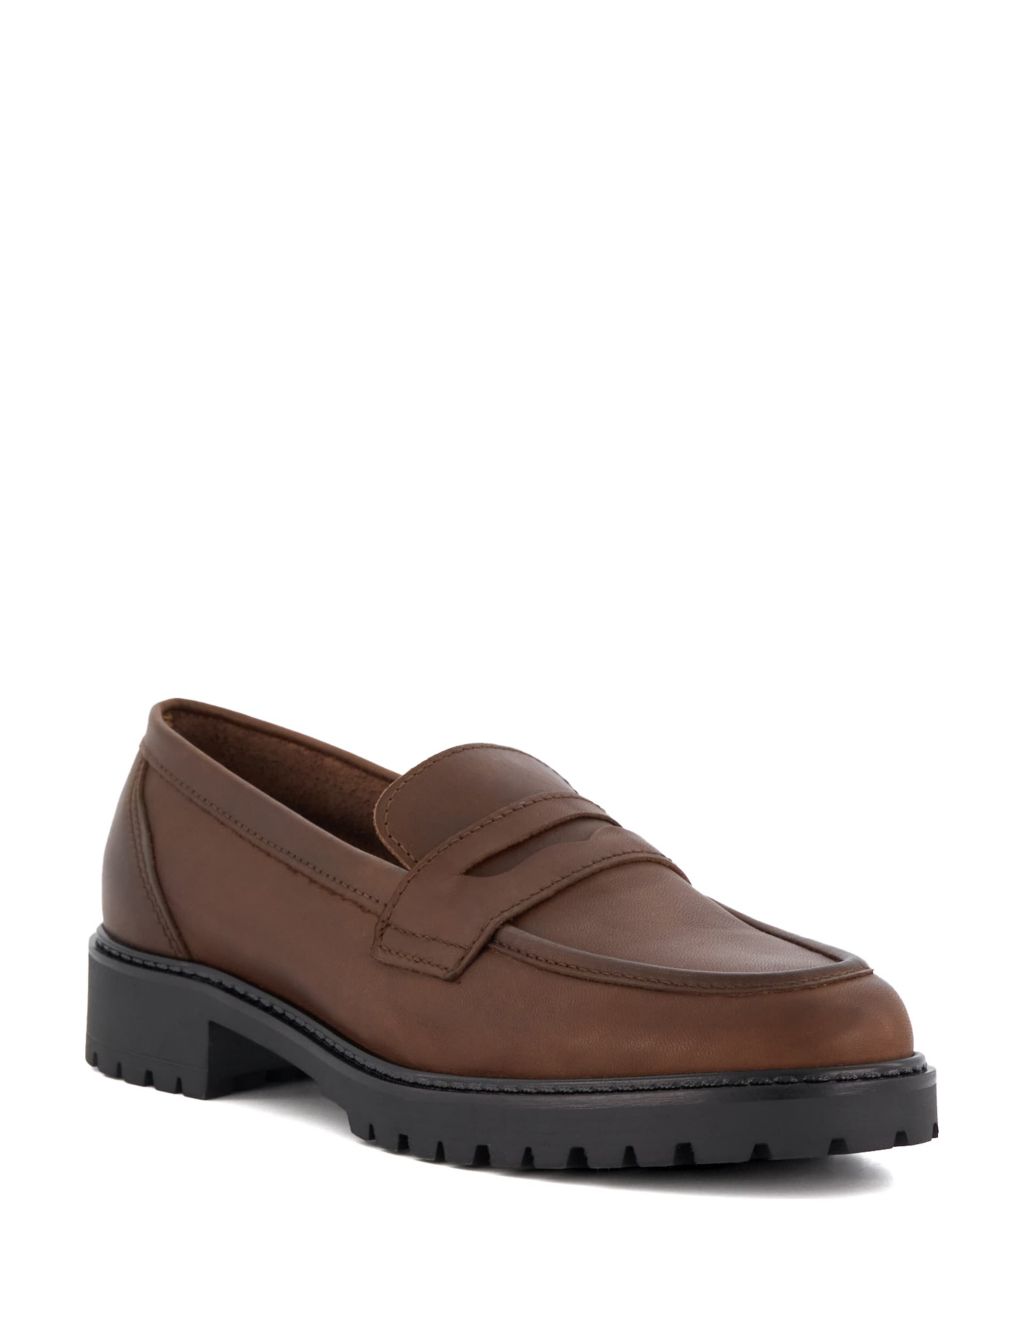 Leather Slip On Loafers image 2